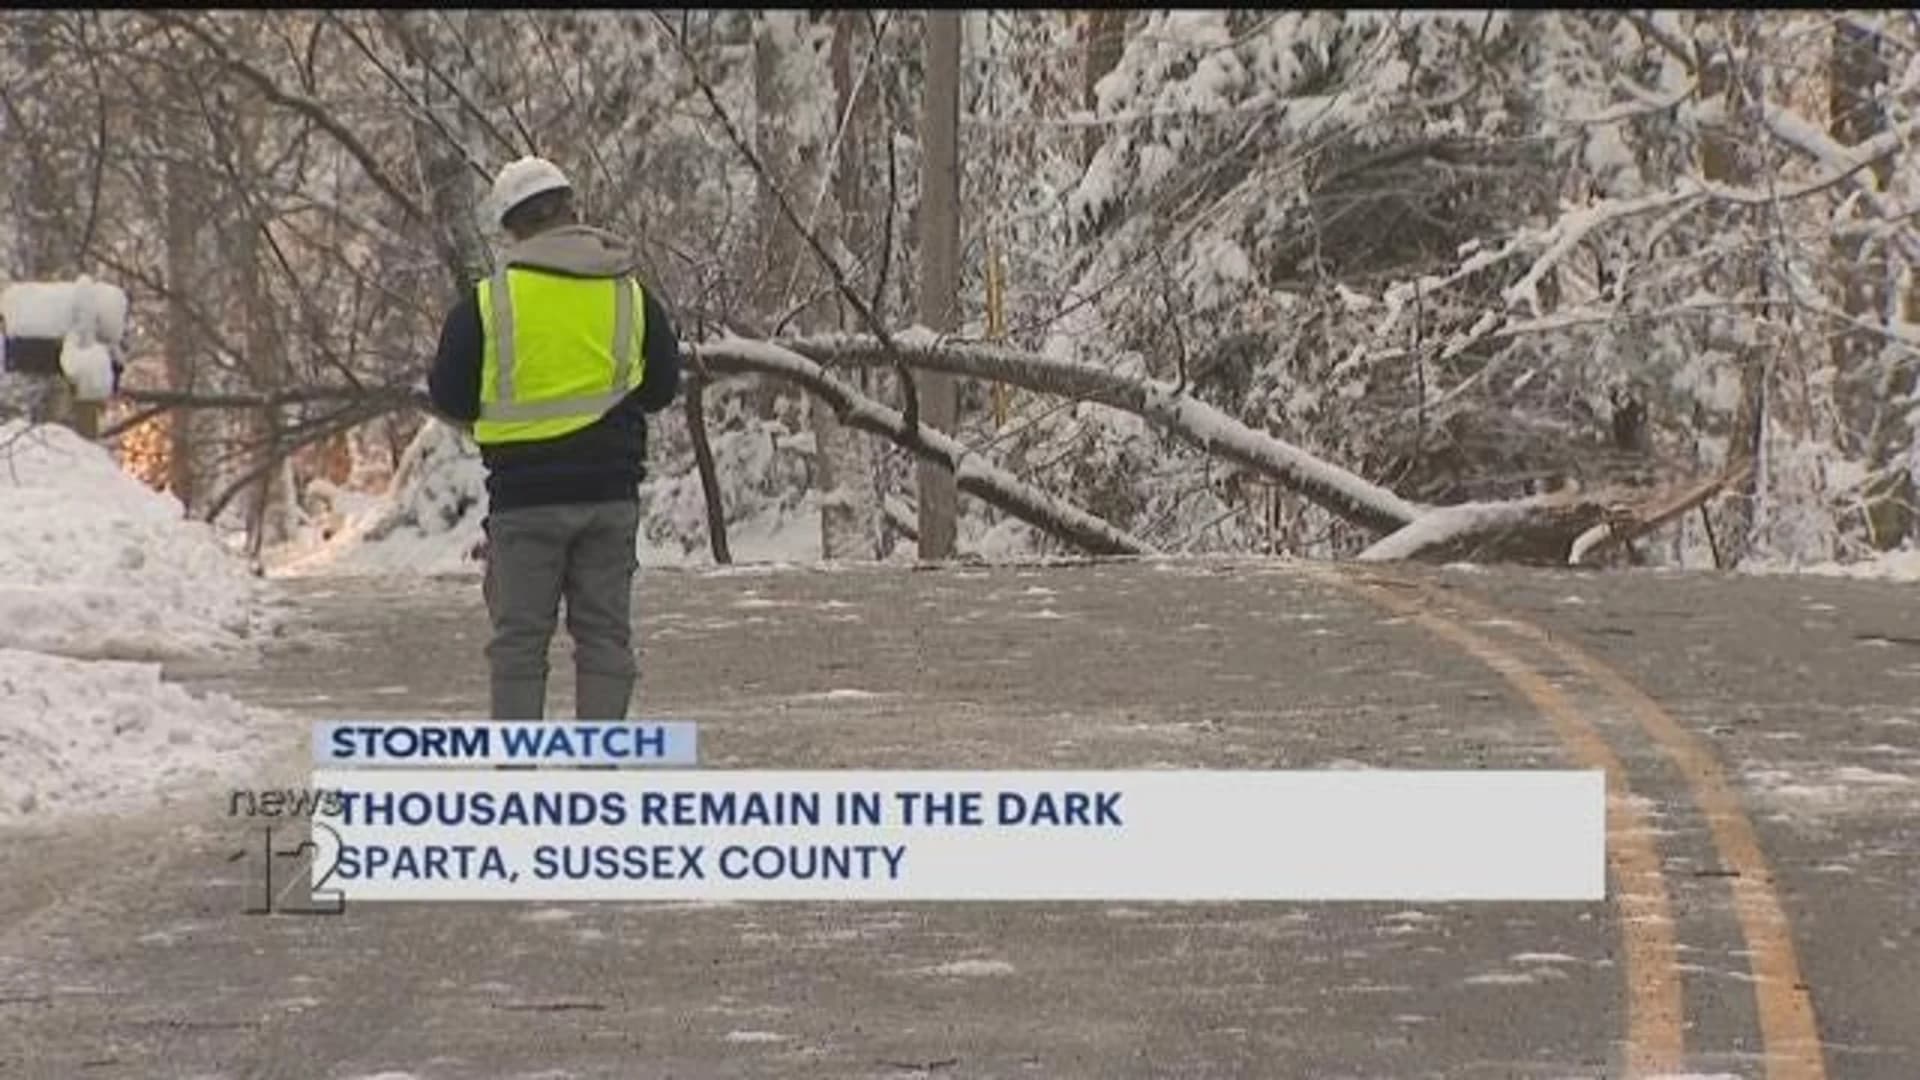 Northern New Jersey slowly recovers from season’s 1st major snowstorm